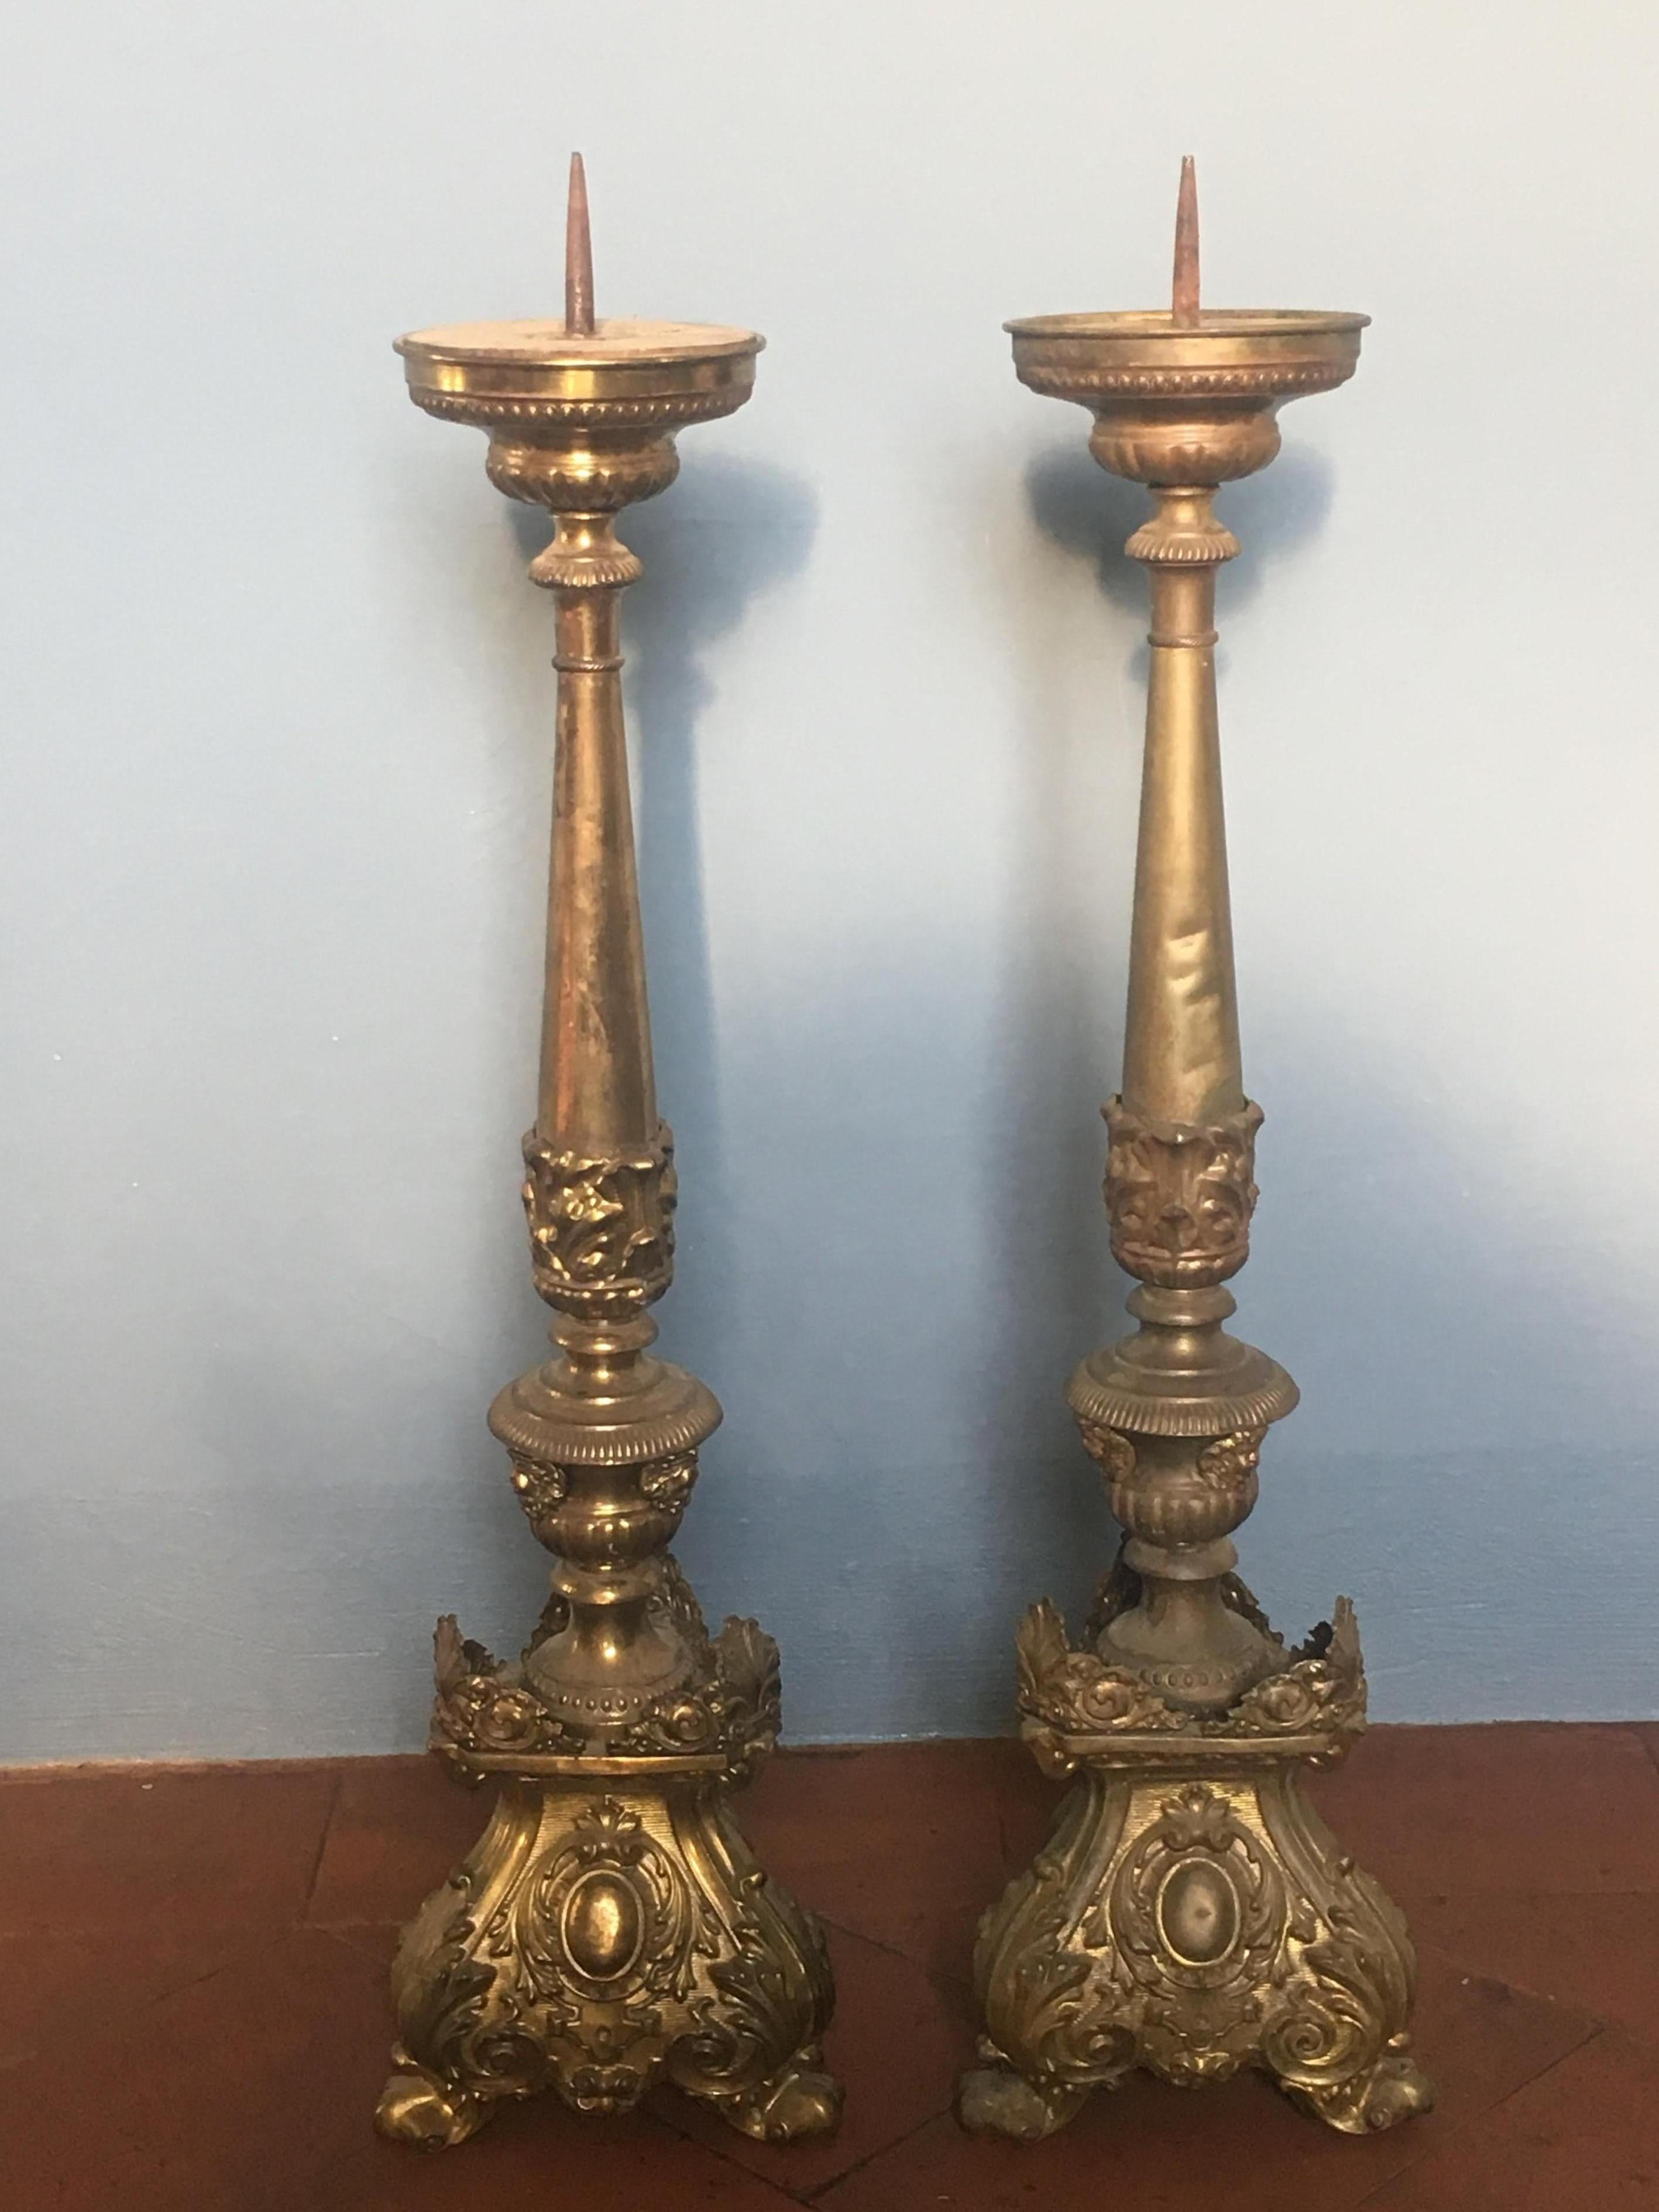 19th century pair of Italian ecclesiastic altar brass candleholder, 1890s.
This pair of candleholder is in good vintage conditions wear consist with age and use.
 